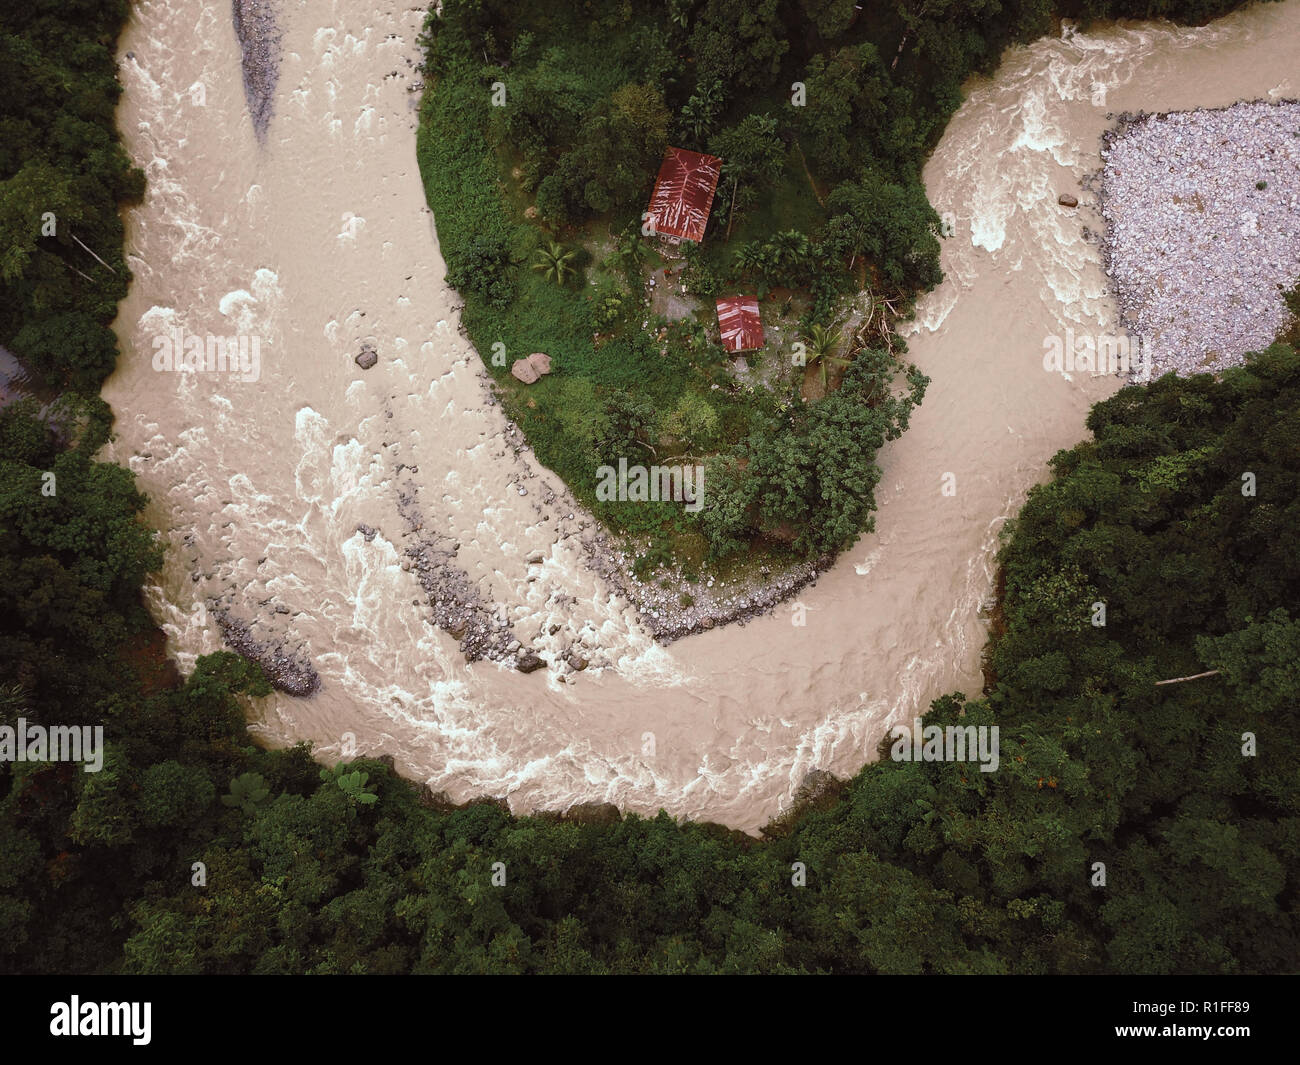 Rainforest River in Indonesia threatening to flood Huts. Drone Shot. Stock Photo